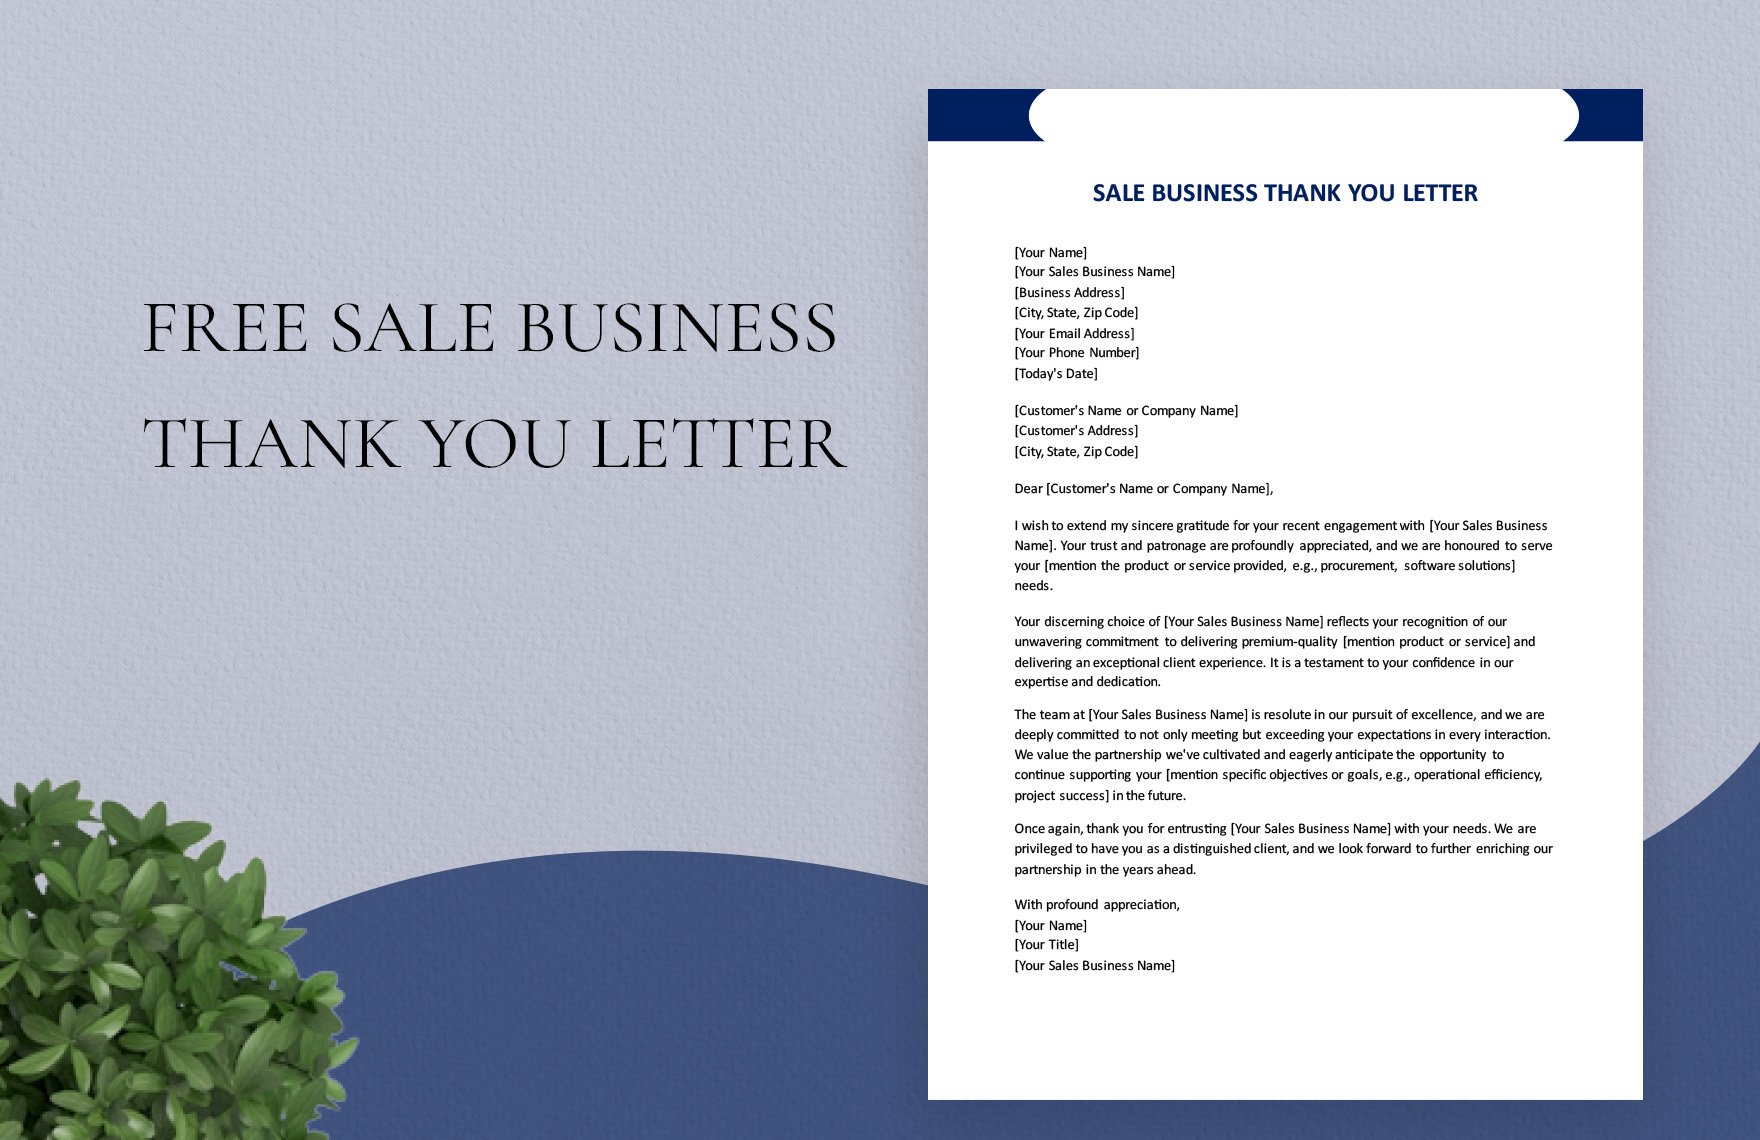 Sale Business Thank You Letter Template